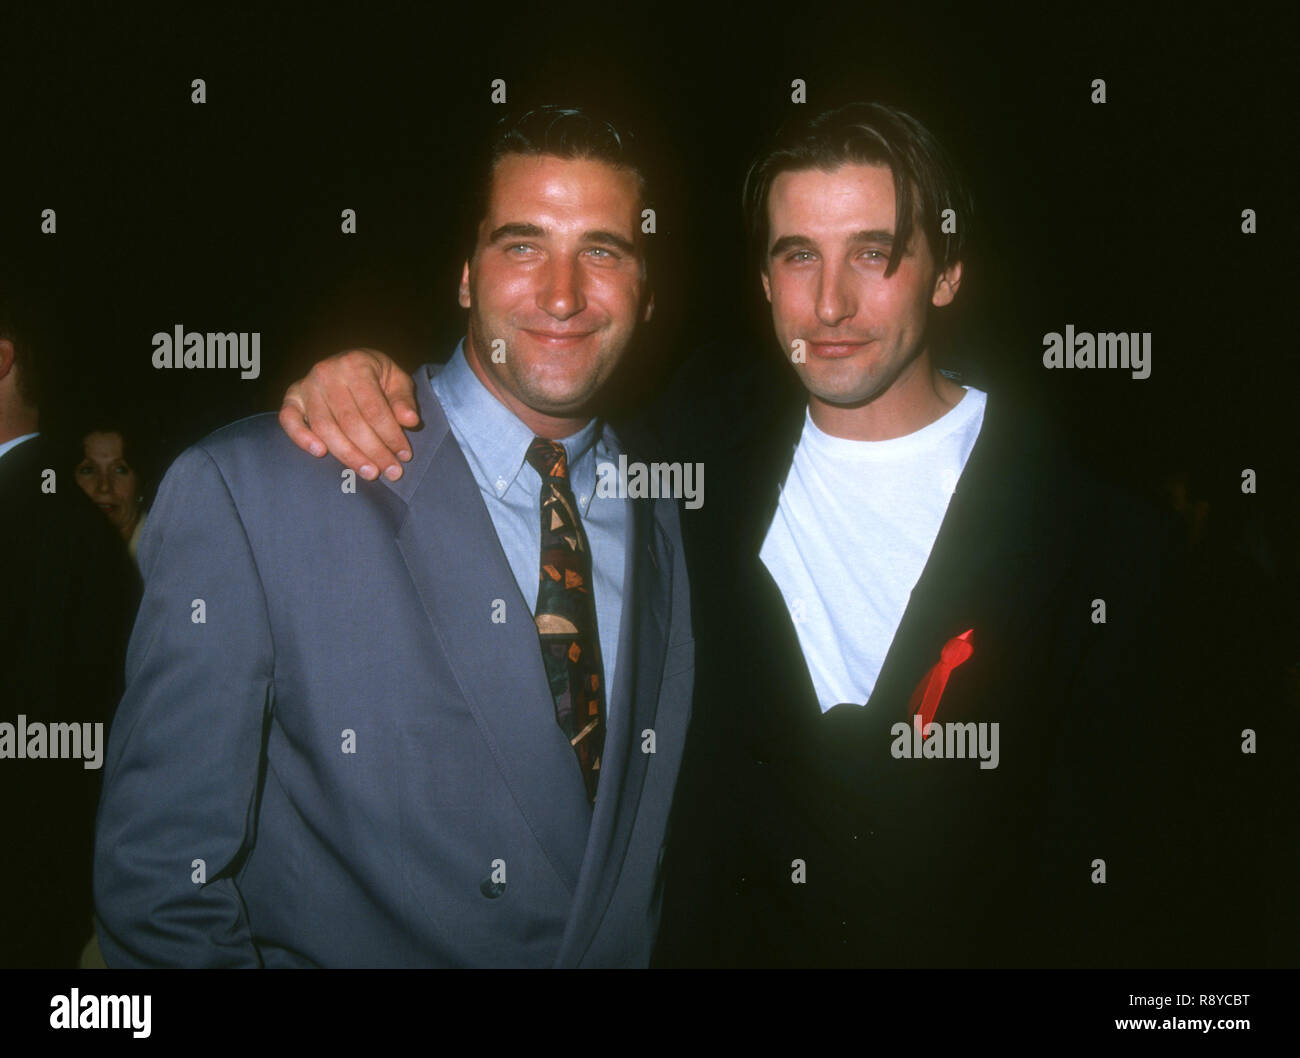 WEST HOLLYWOOD, CA - APRIL 29: Actors/brothers Daniel Baldwin and William Baldwin attend the 'Three of Hearts' West Hollywood Premiere on April 29, 1993 at the DGA Theater in West Hollywood, California. Photo by Barry King/Alamy Stock Photo Stock Photo